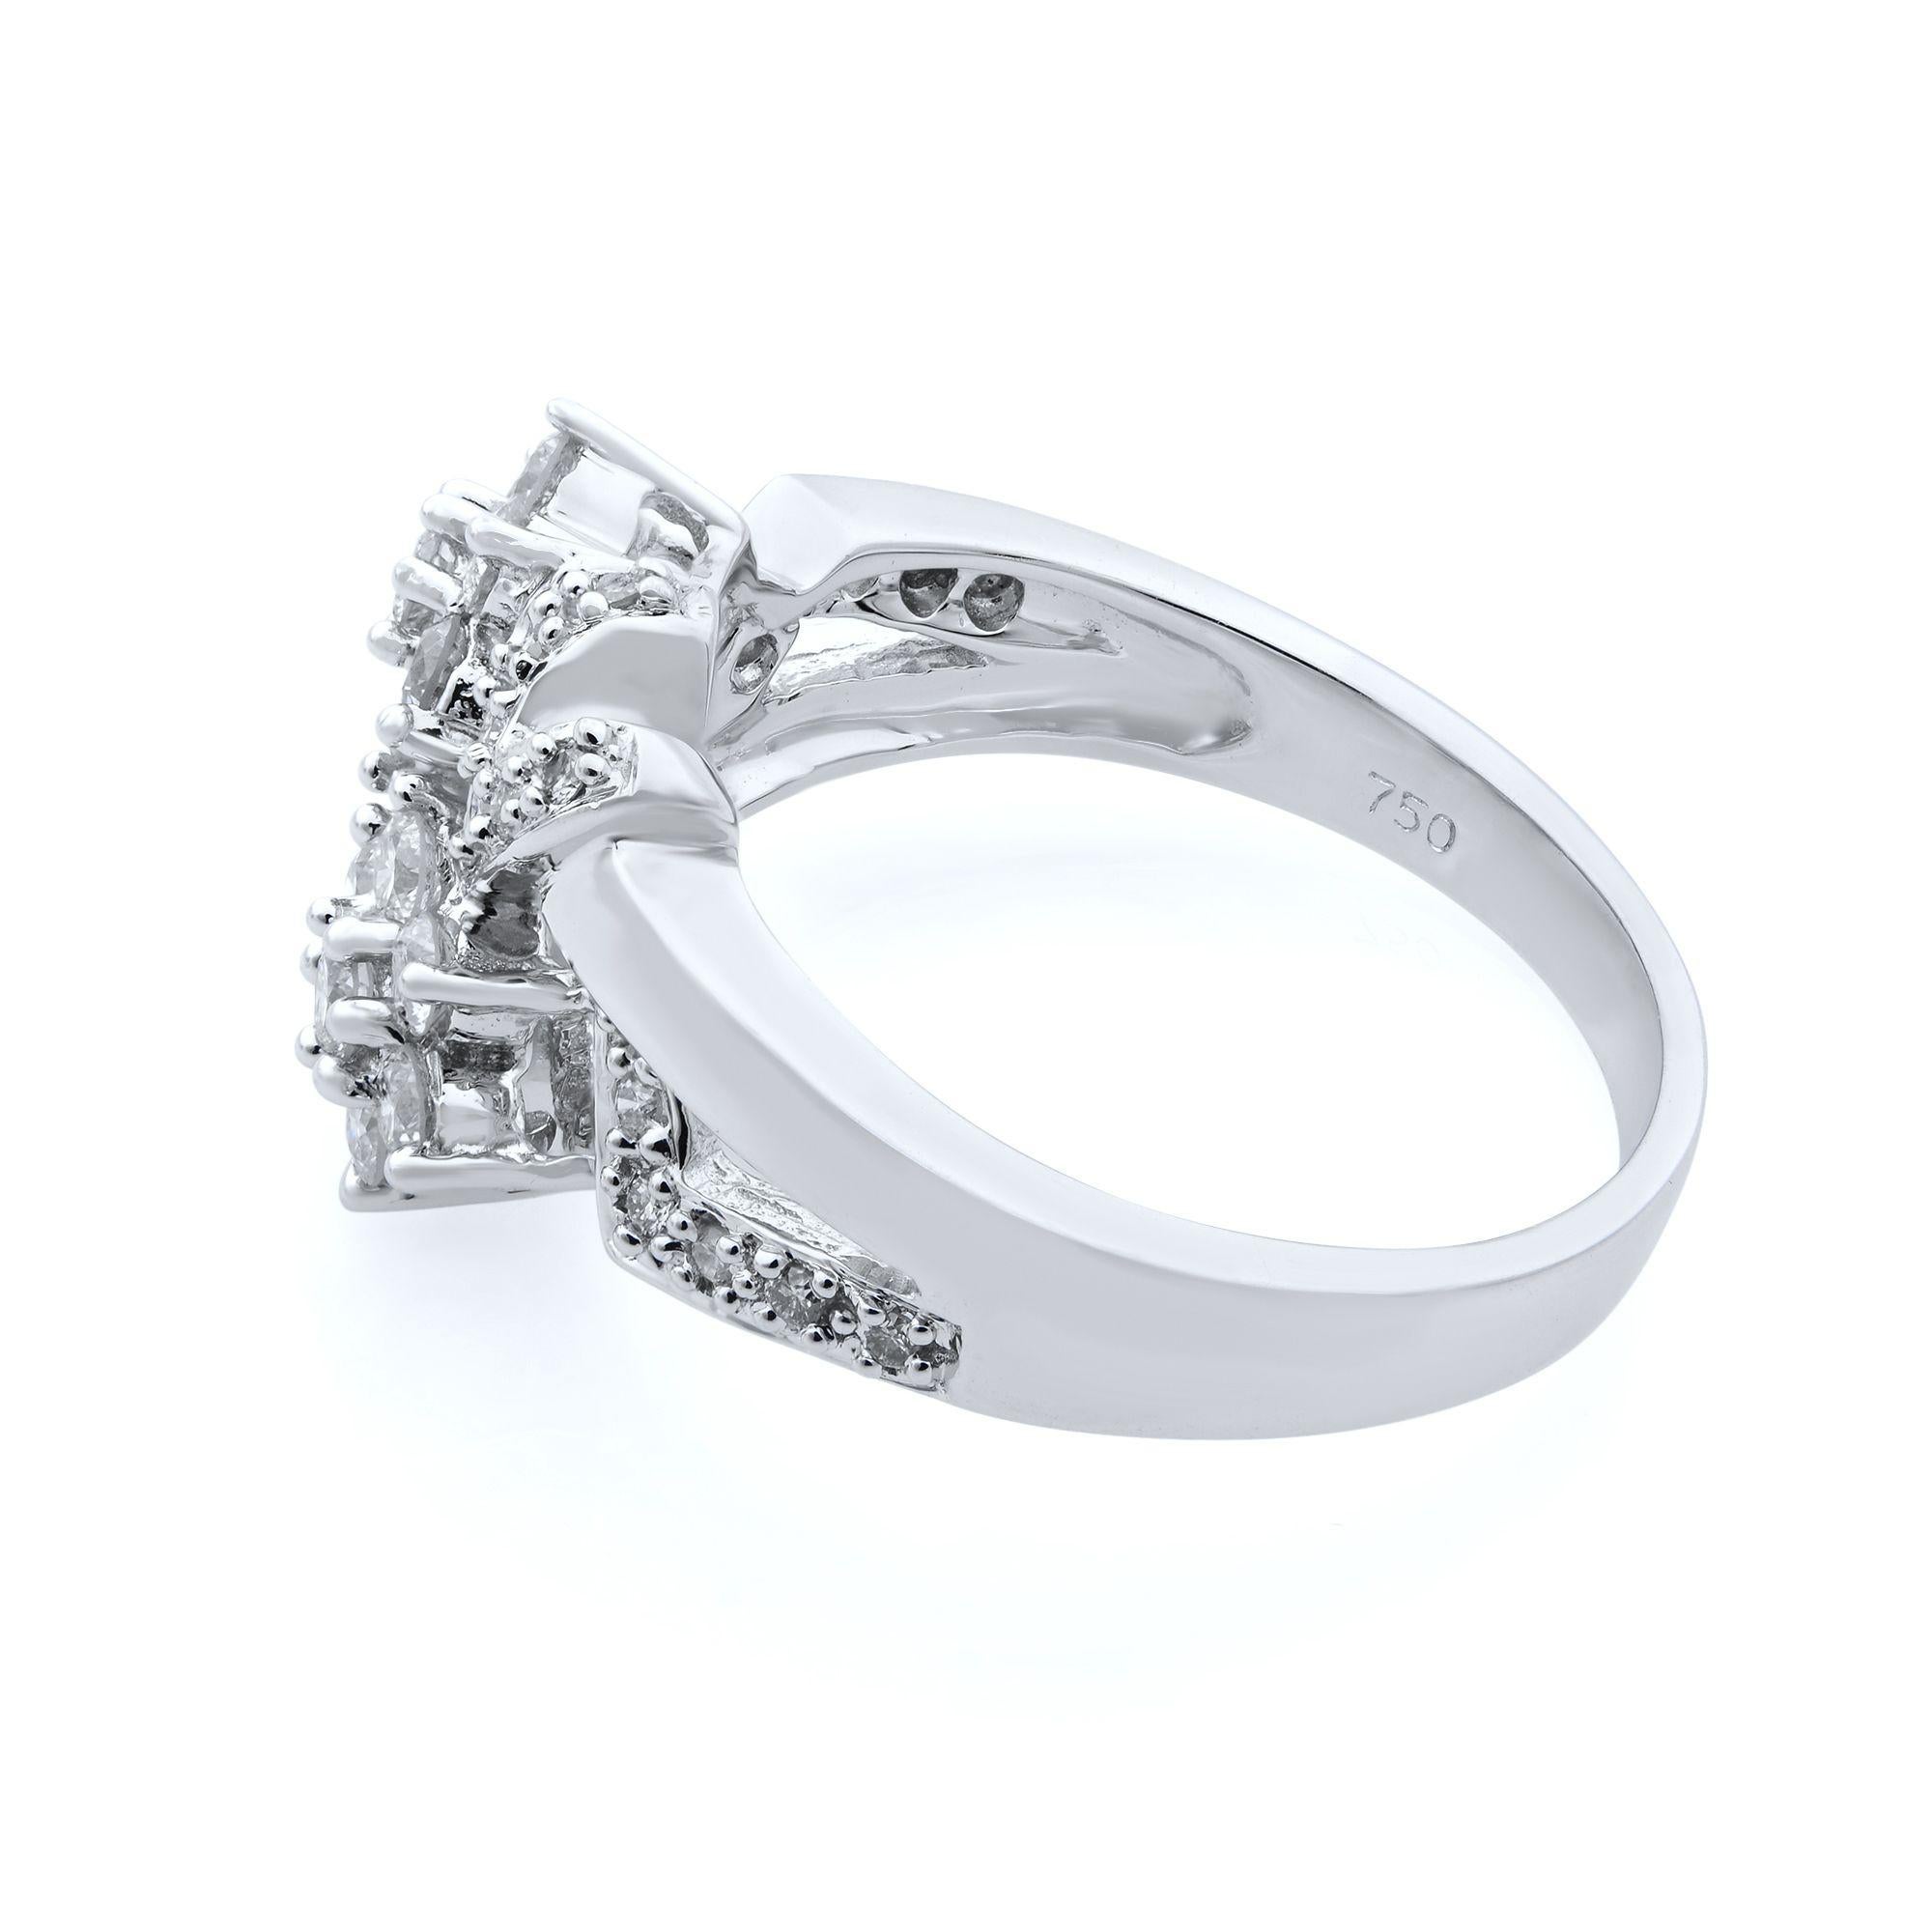 This unique 18K white gold ring features round brilliant cut diamonds set within a floral shape and other shapes on each side. Total diamond carat weight is approx. 0.75. Diamond clarity is VS2 and G-H color. Ring size is 7. Comes with a presentable